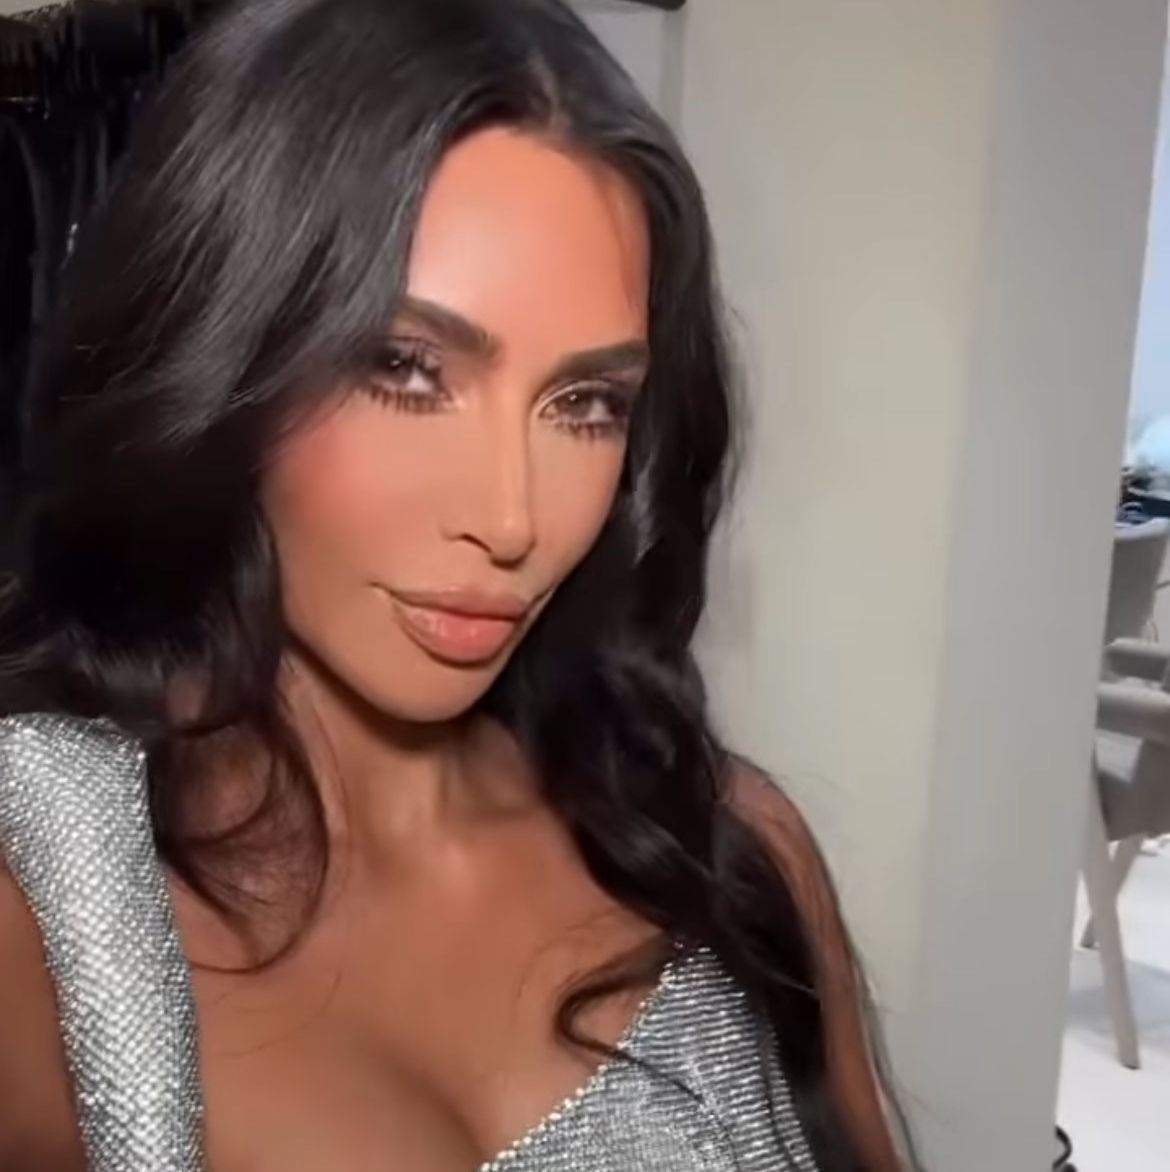 Kim Kardashian Stunned in a Glittering Column Dress With Newly Dark Hair at Her Family's Christmas Eve Party